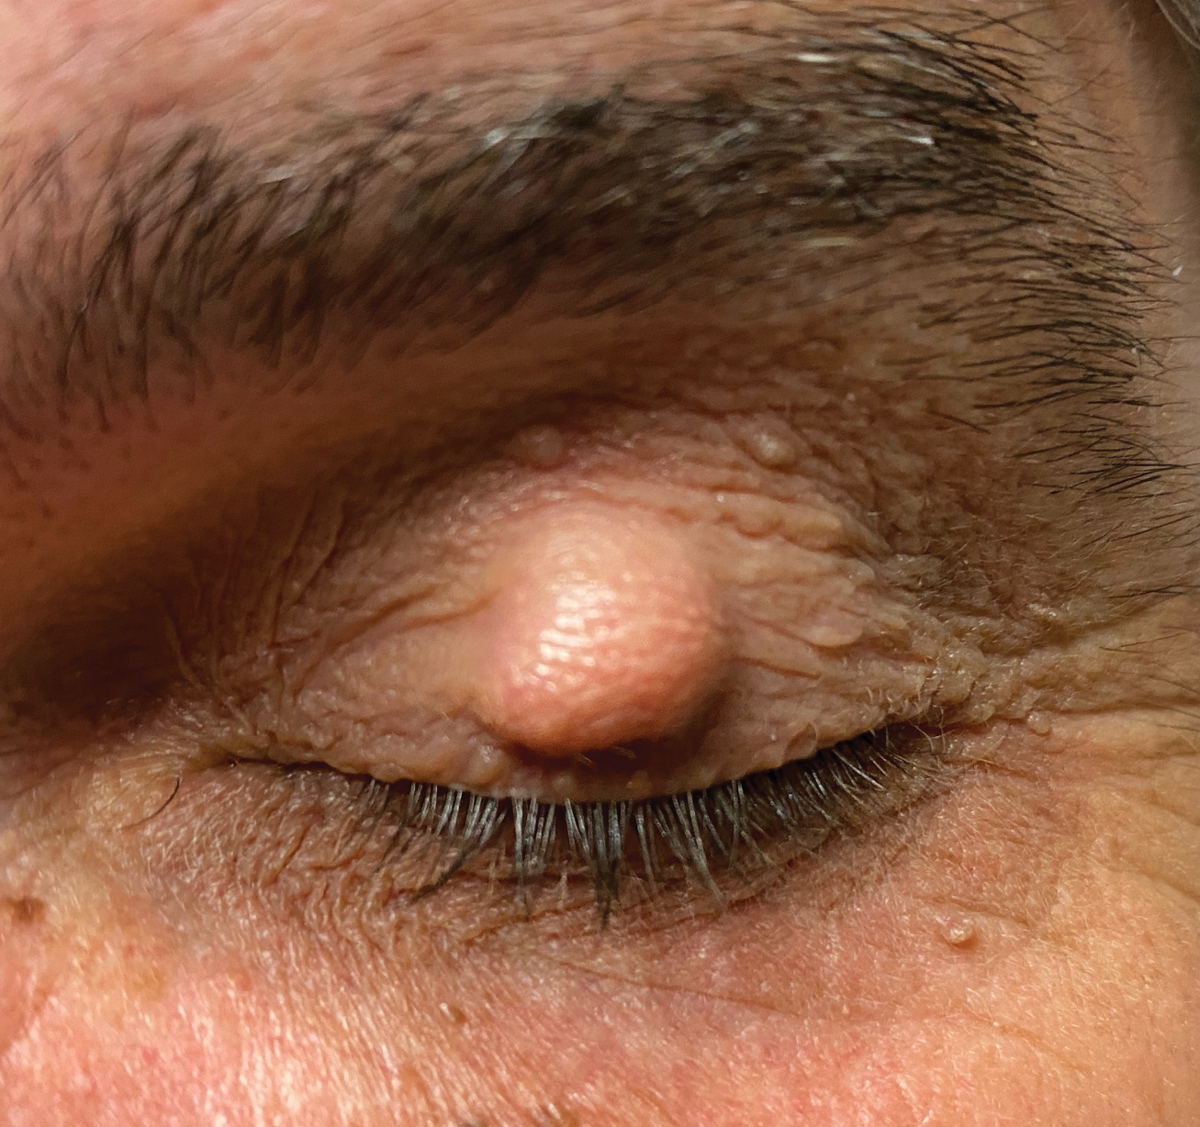 Fig. 3a. Pre-op appearance of a patient prior to a chalazion incision and currettage.